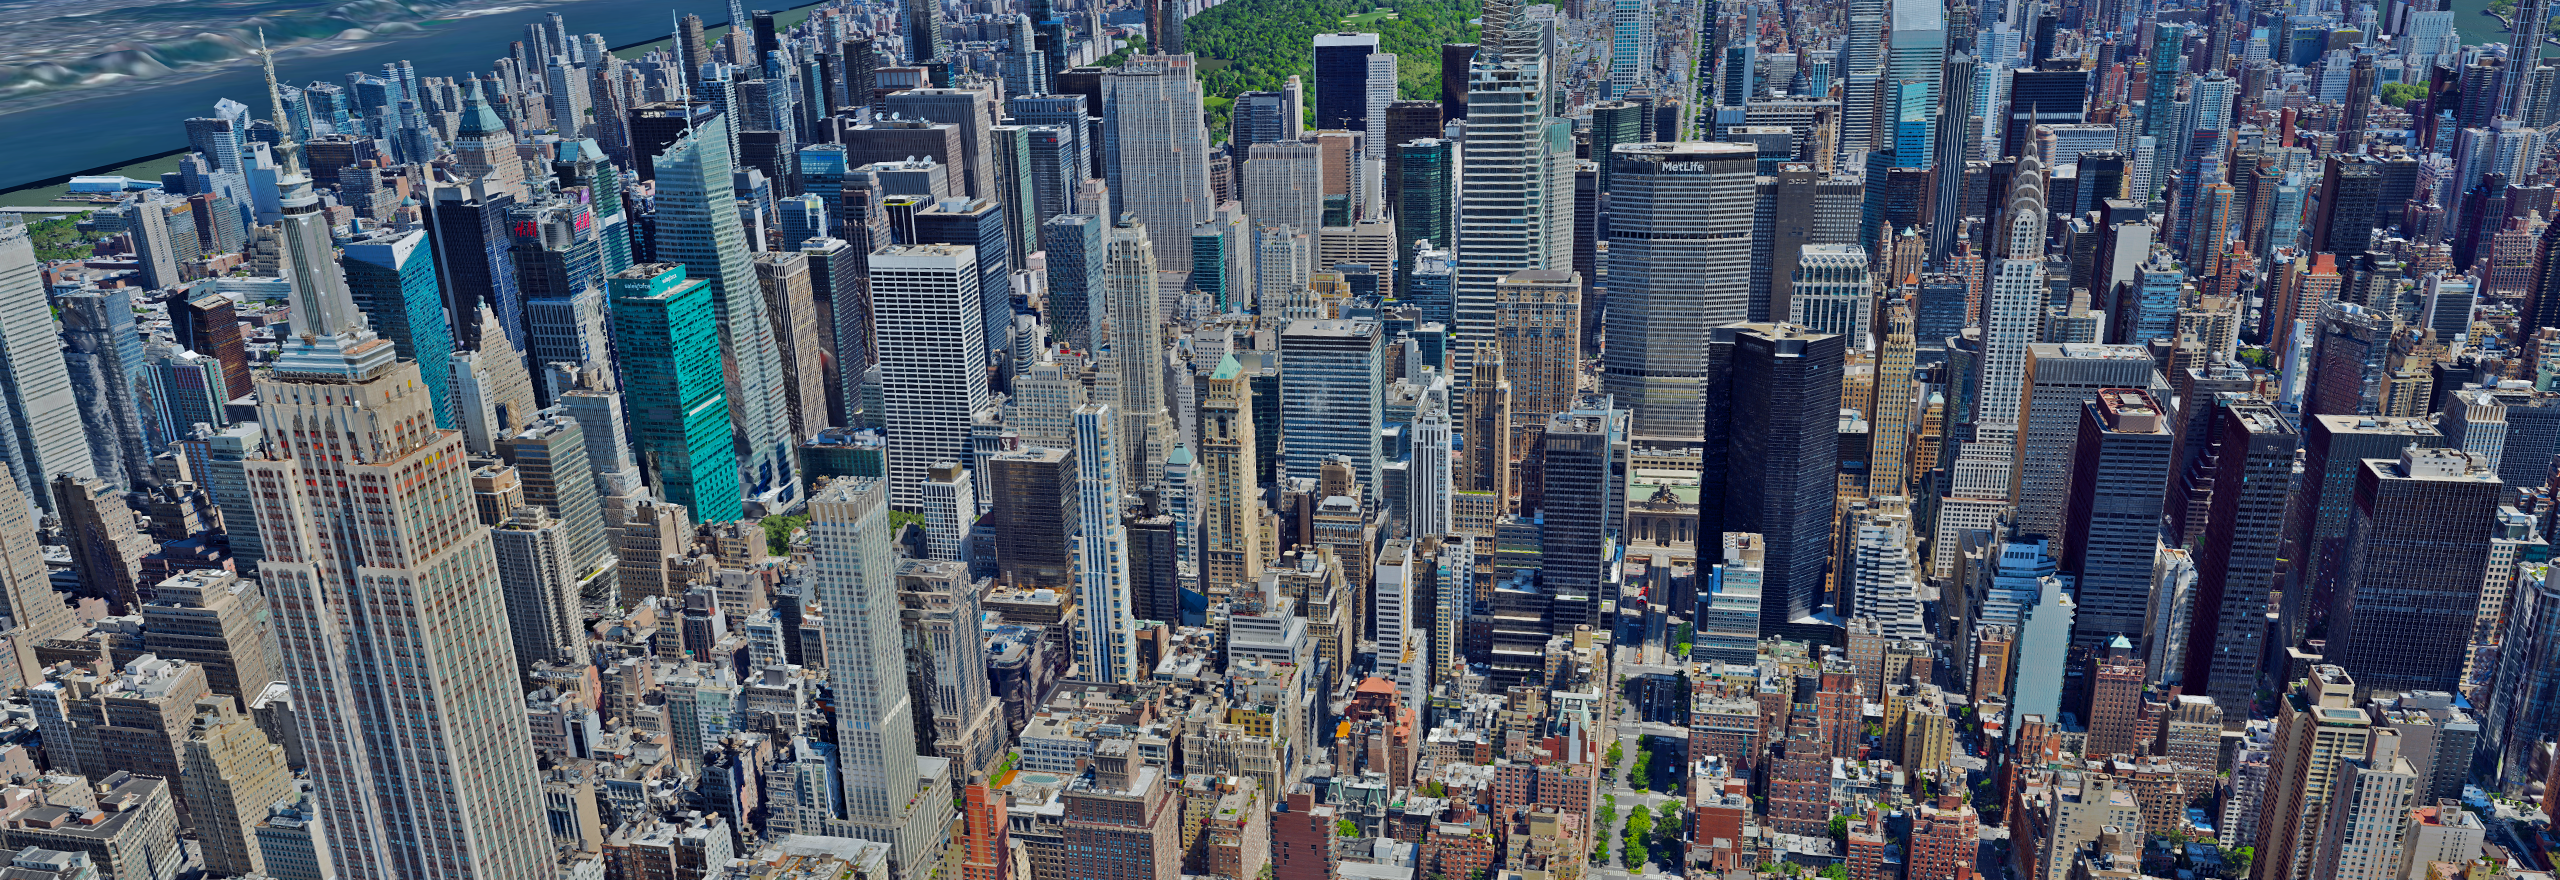 Digital overlay of a major city as seen from above